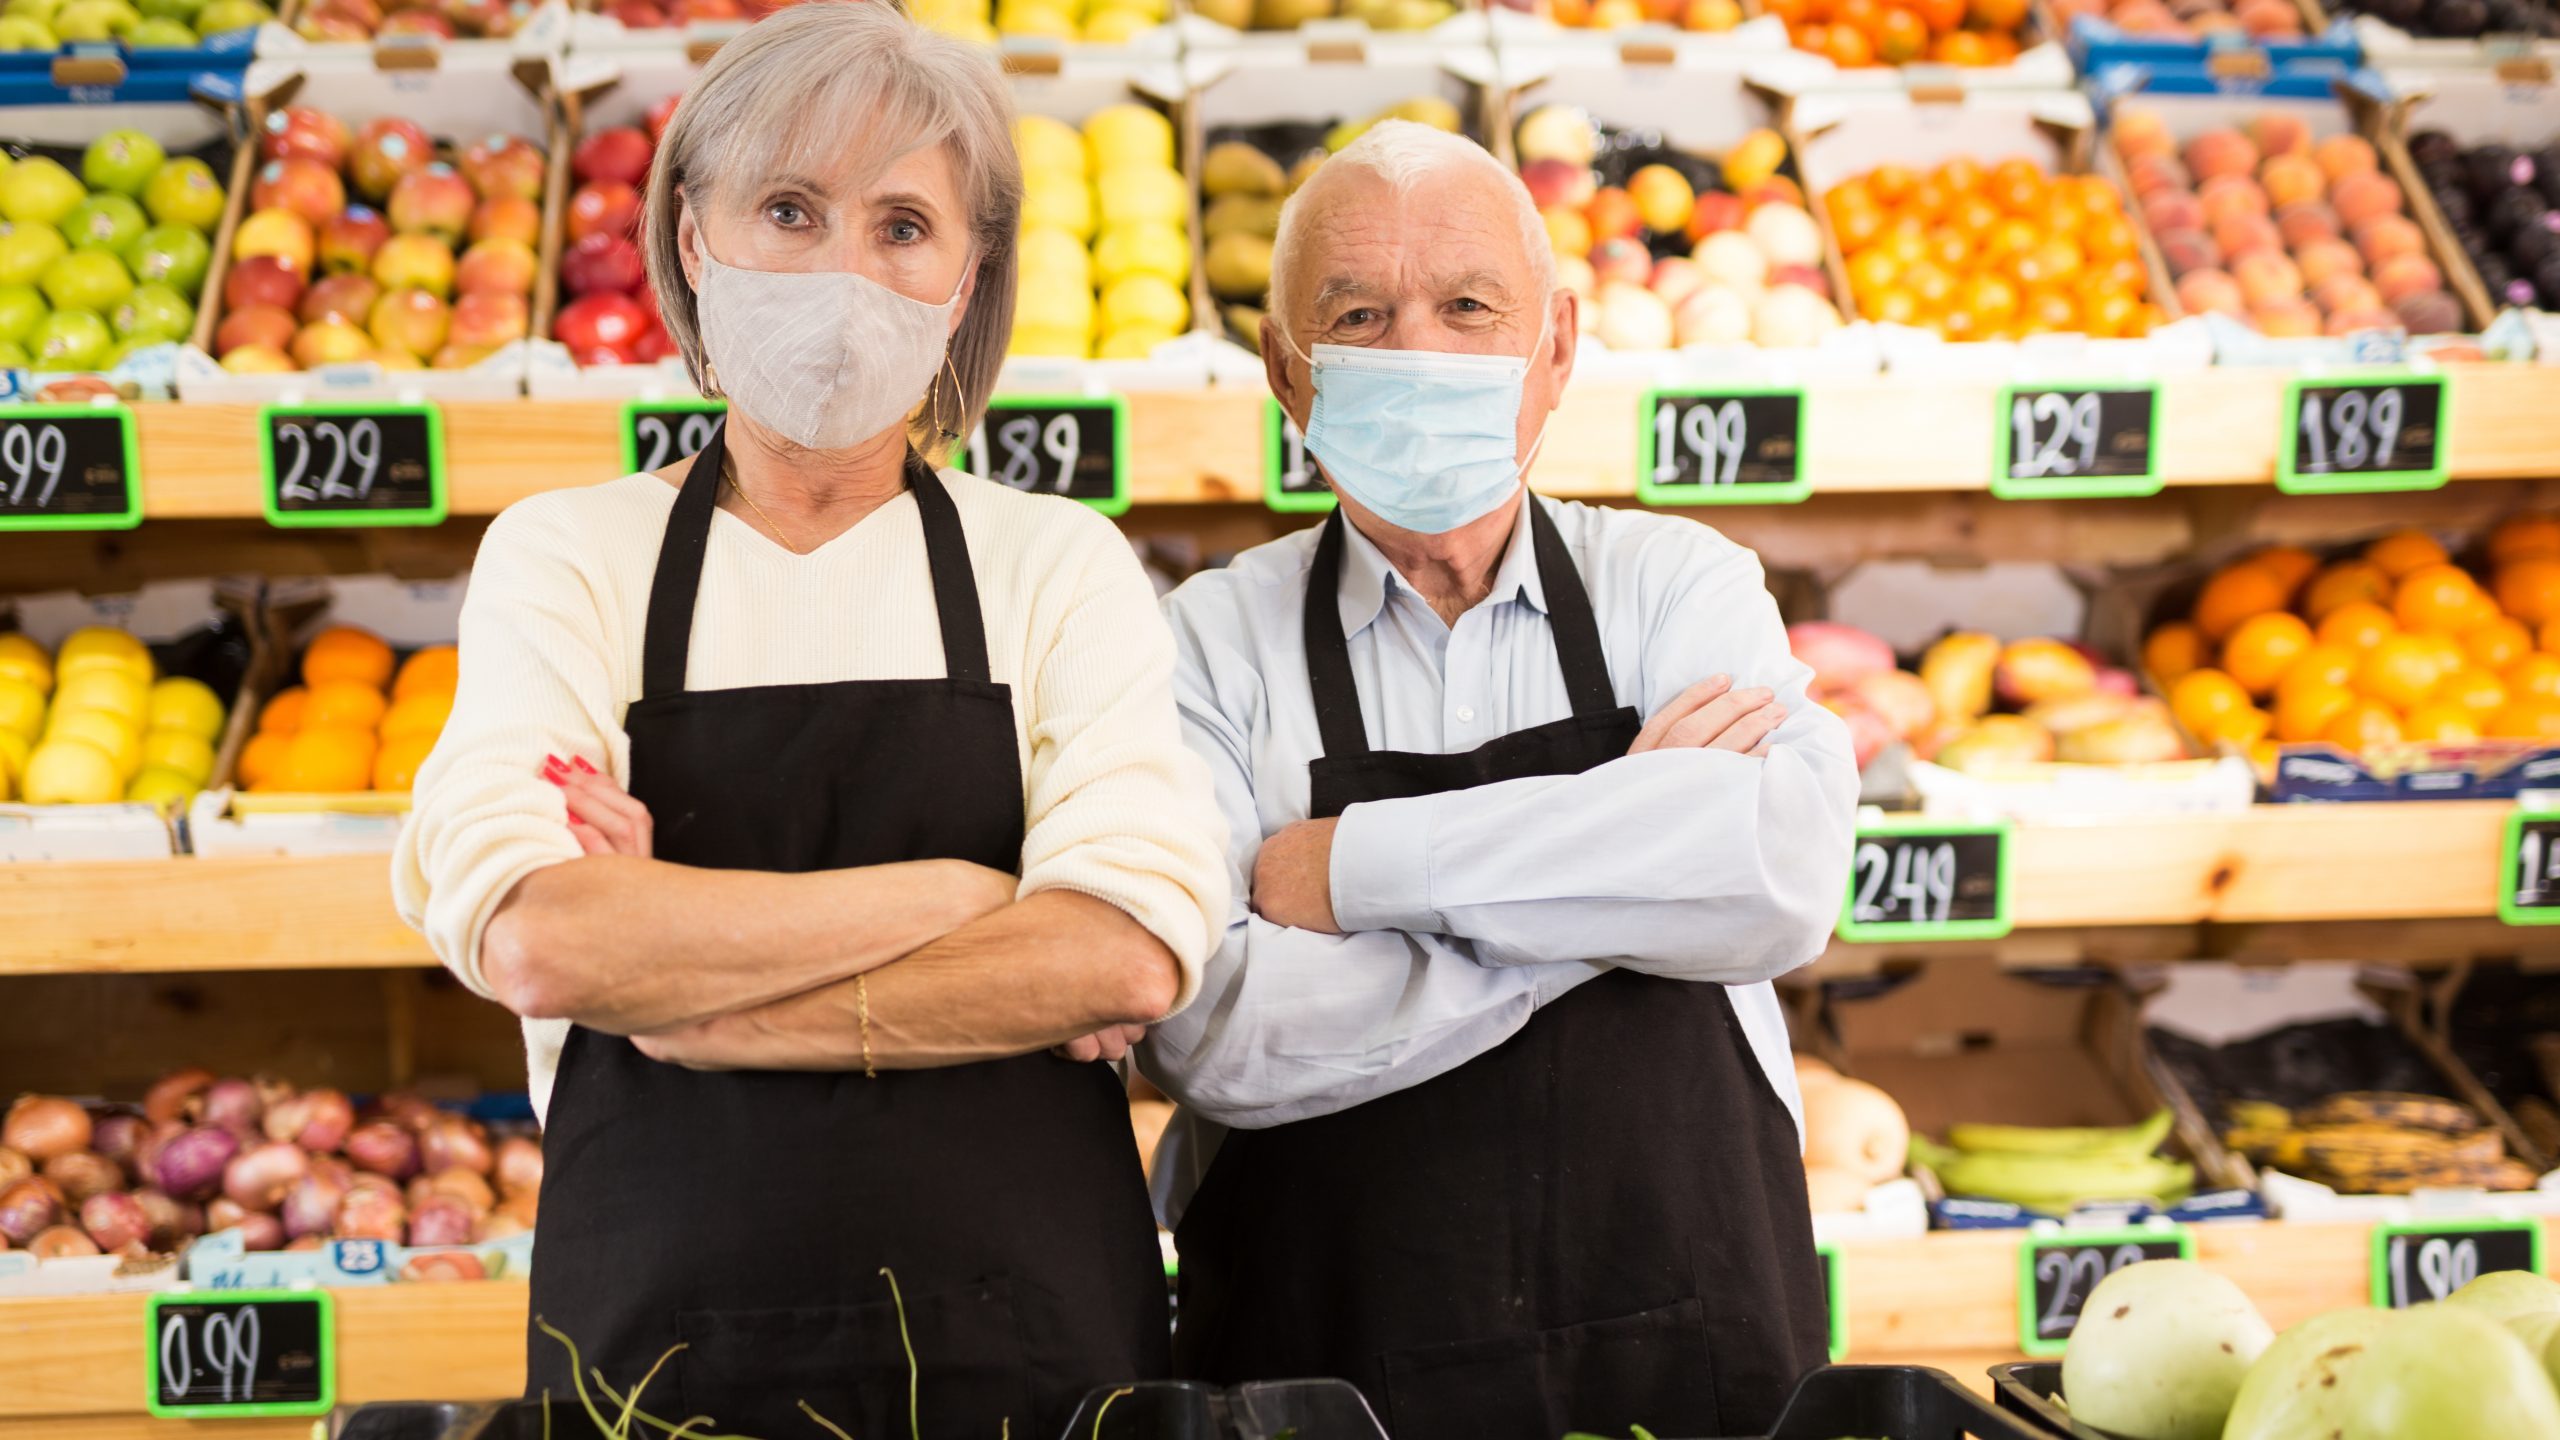 Mature workers in produce section of grocery store